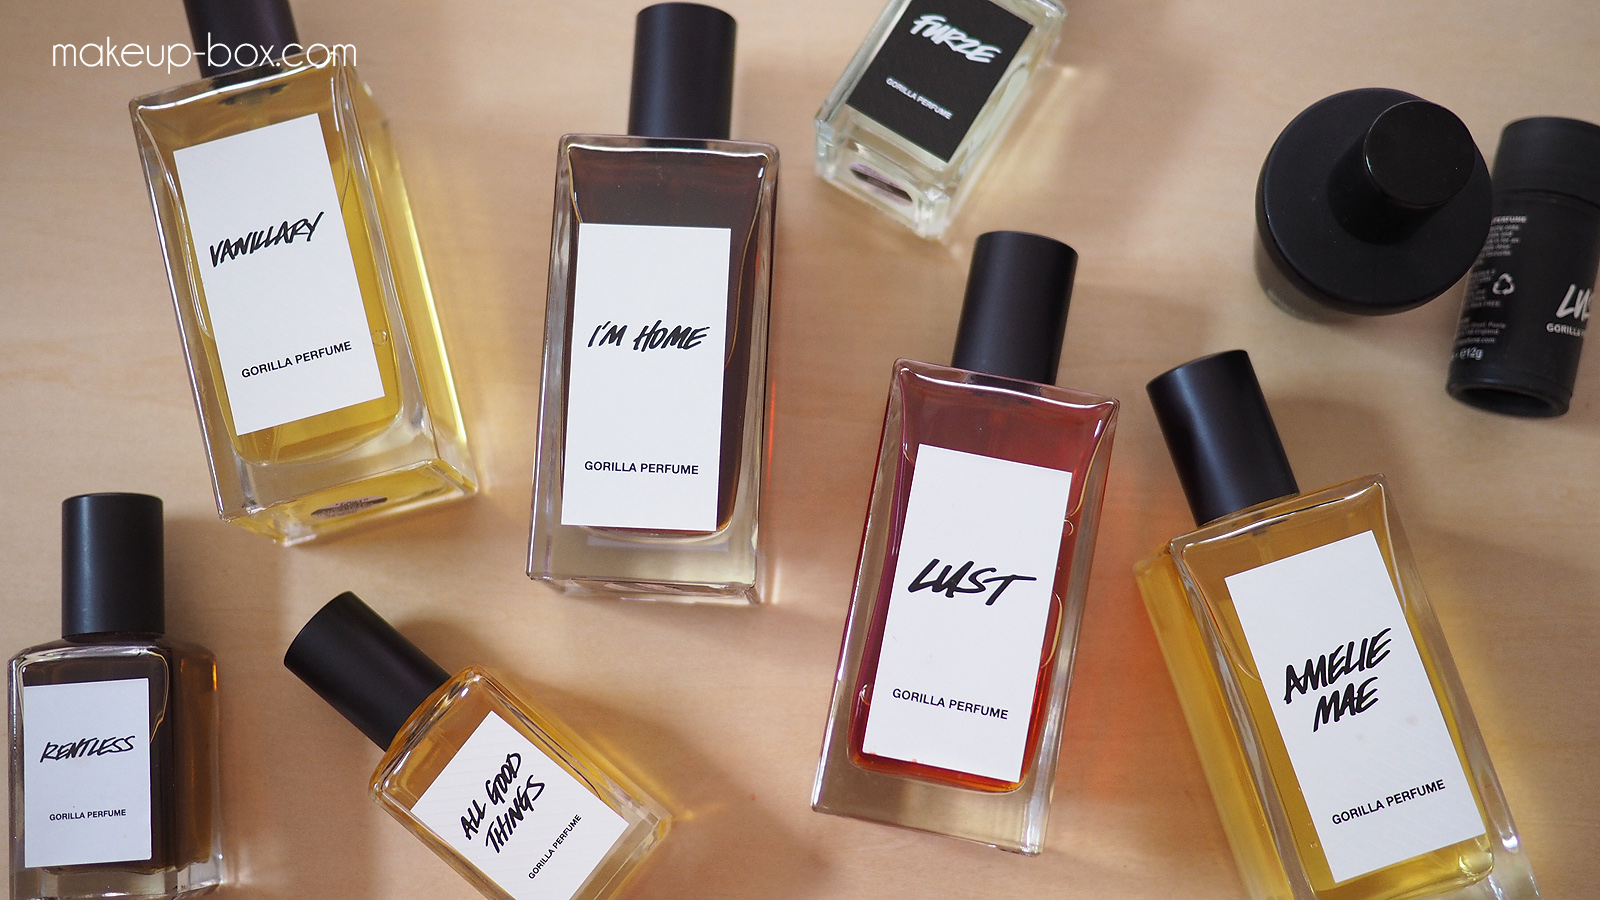 The Makeup Box: LUSH Gorilla Perfumes - My Obsession and Collection